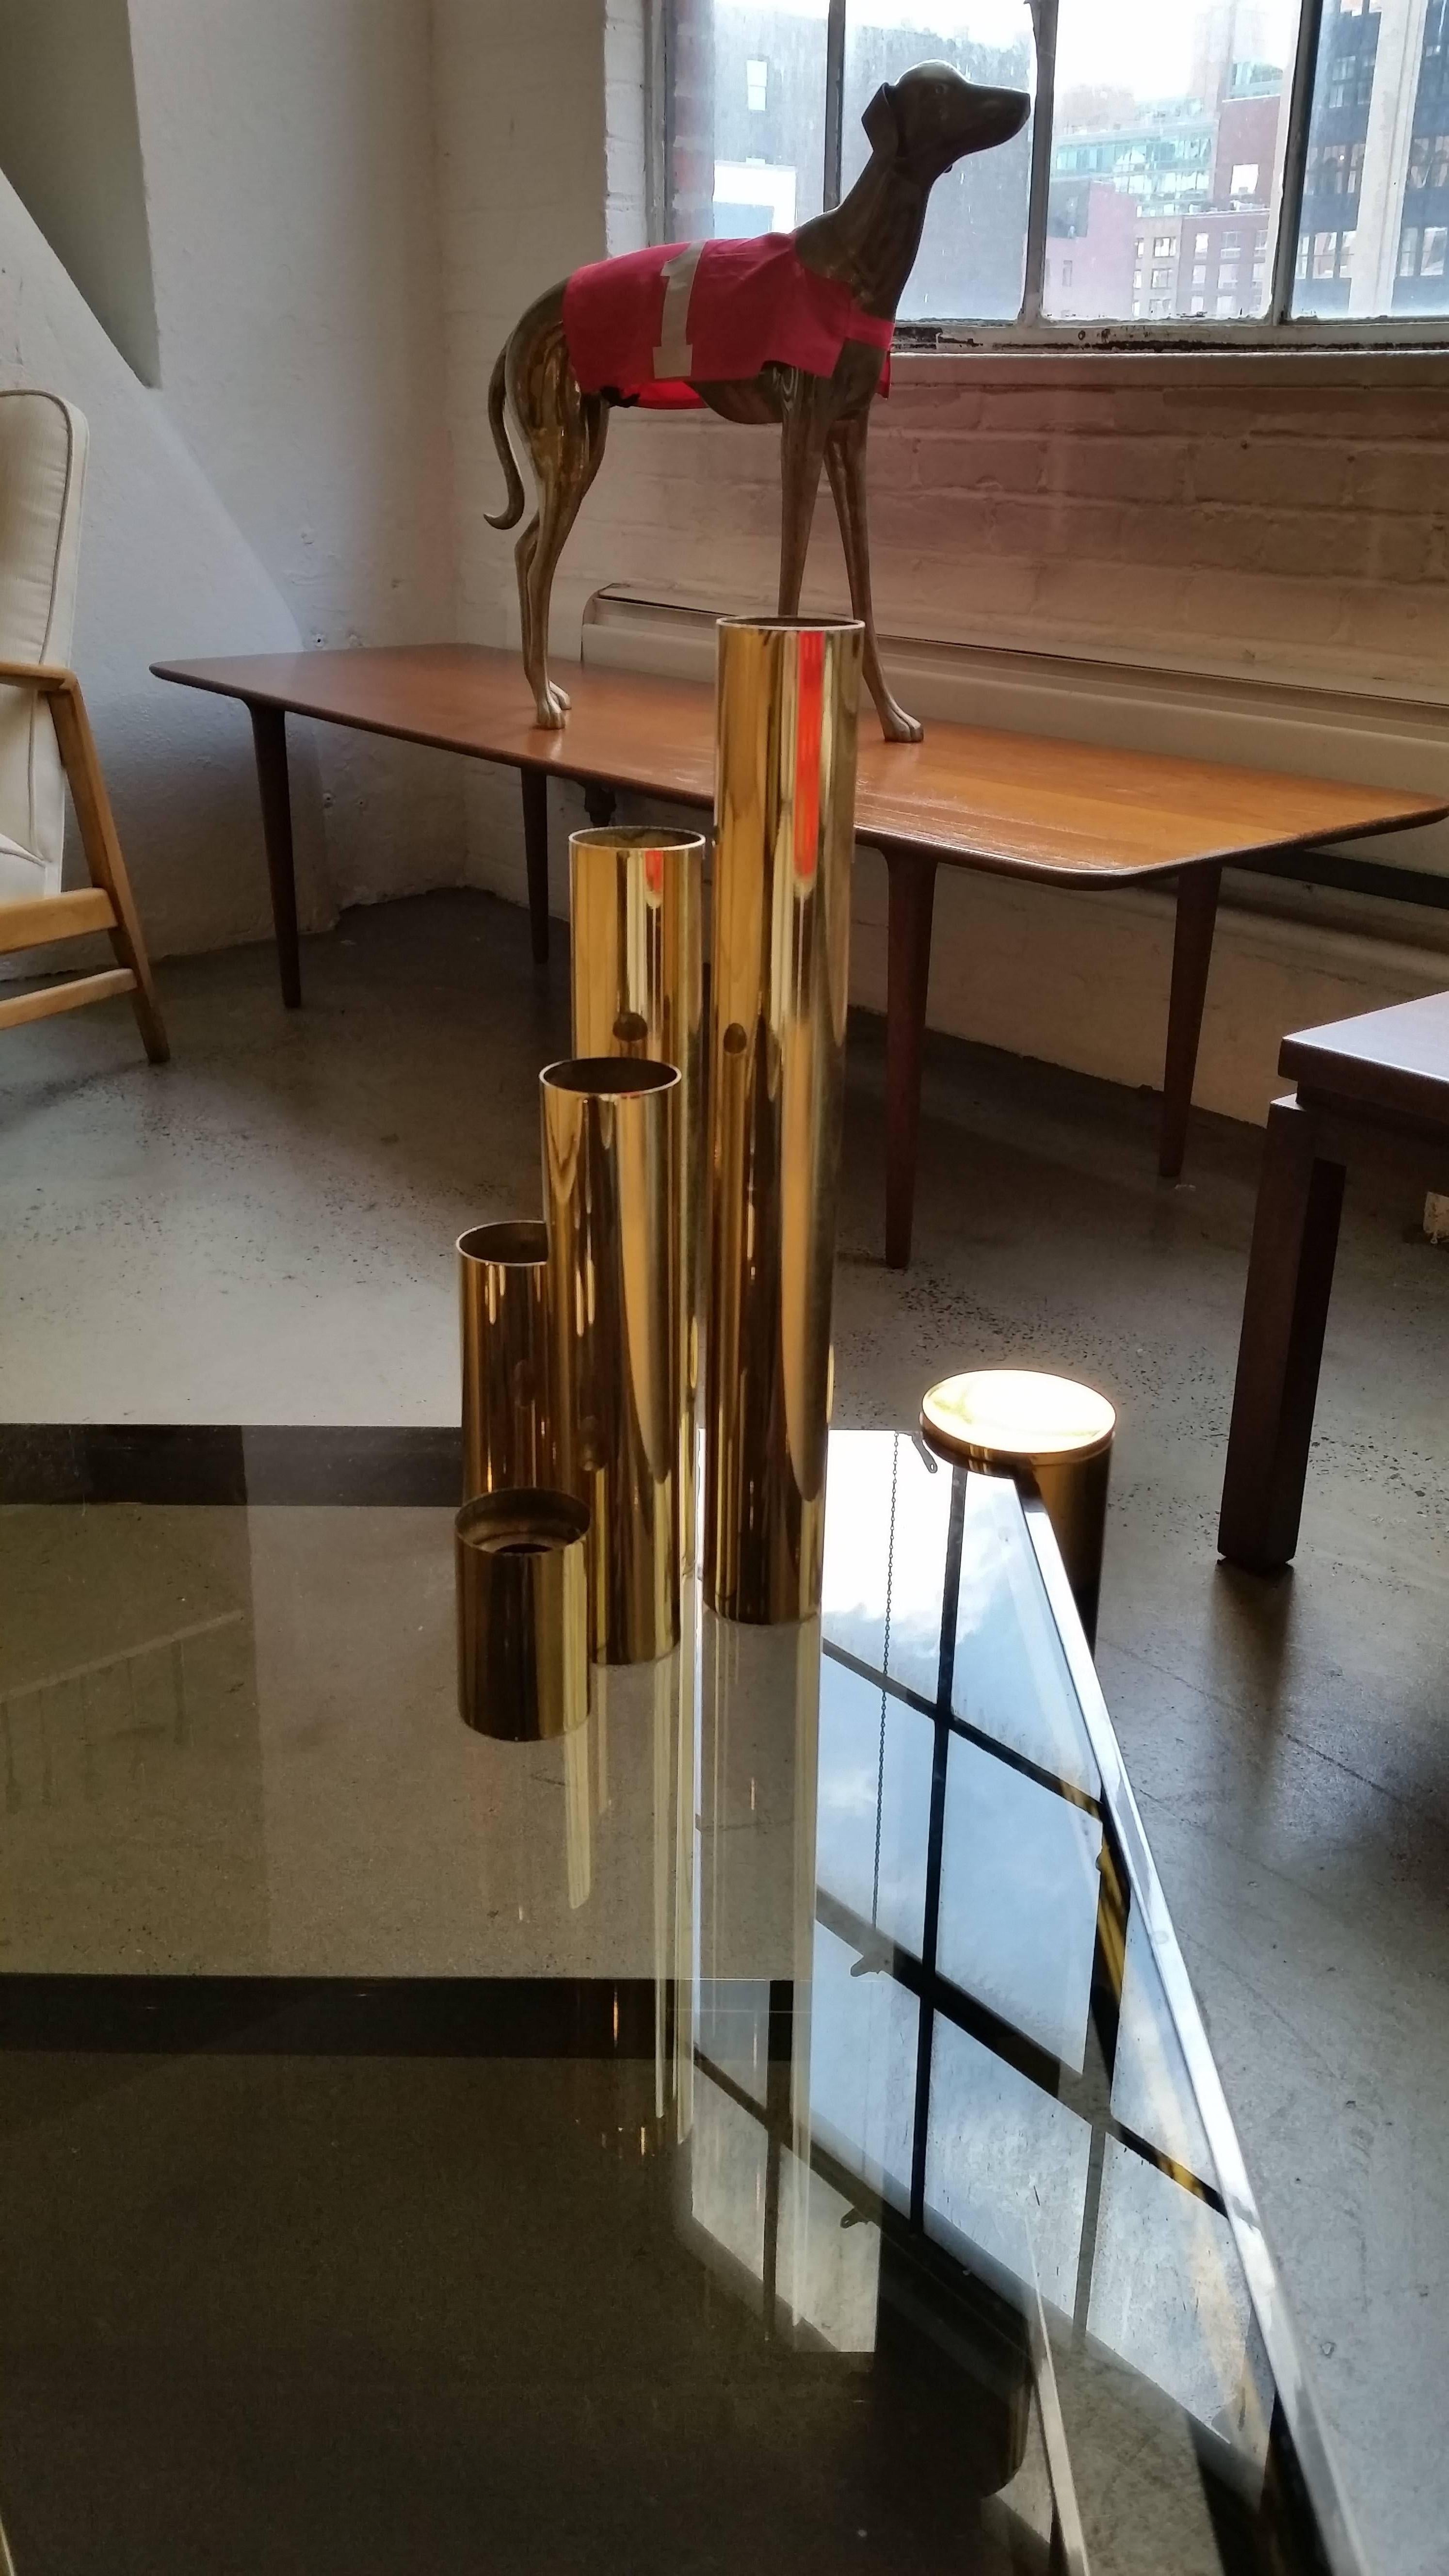 Set of five 1970s glam tubular brass candleholders in graduated heights. These have been recently re-plated and are in excellent condition. Heavy, substantial pieces--would function well as a candelabra. Maker unknown. Taper candles not included.